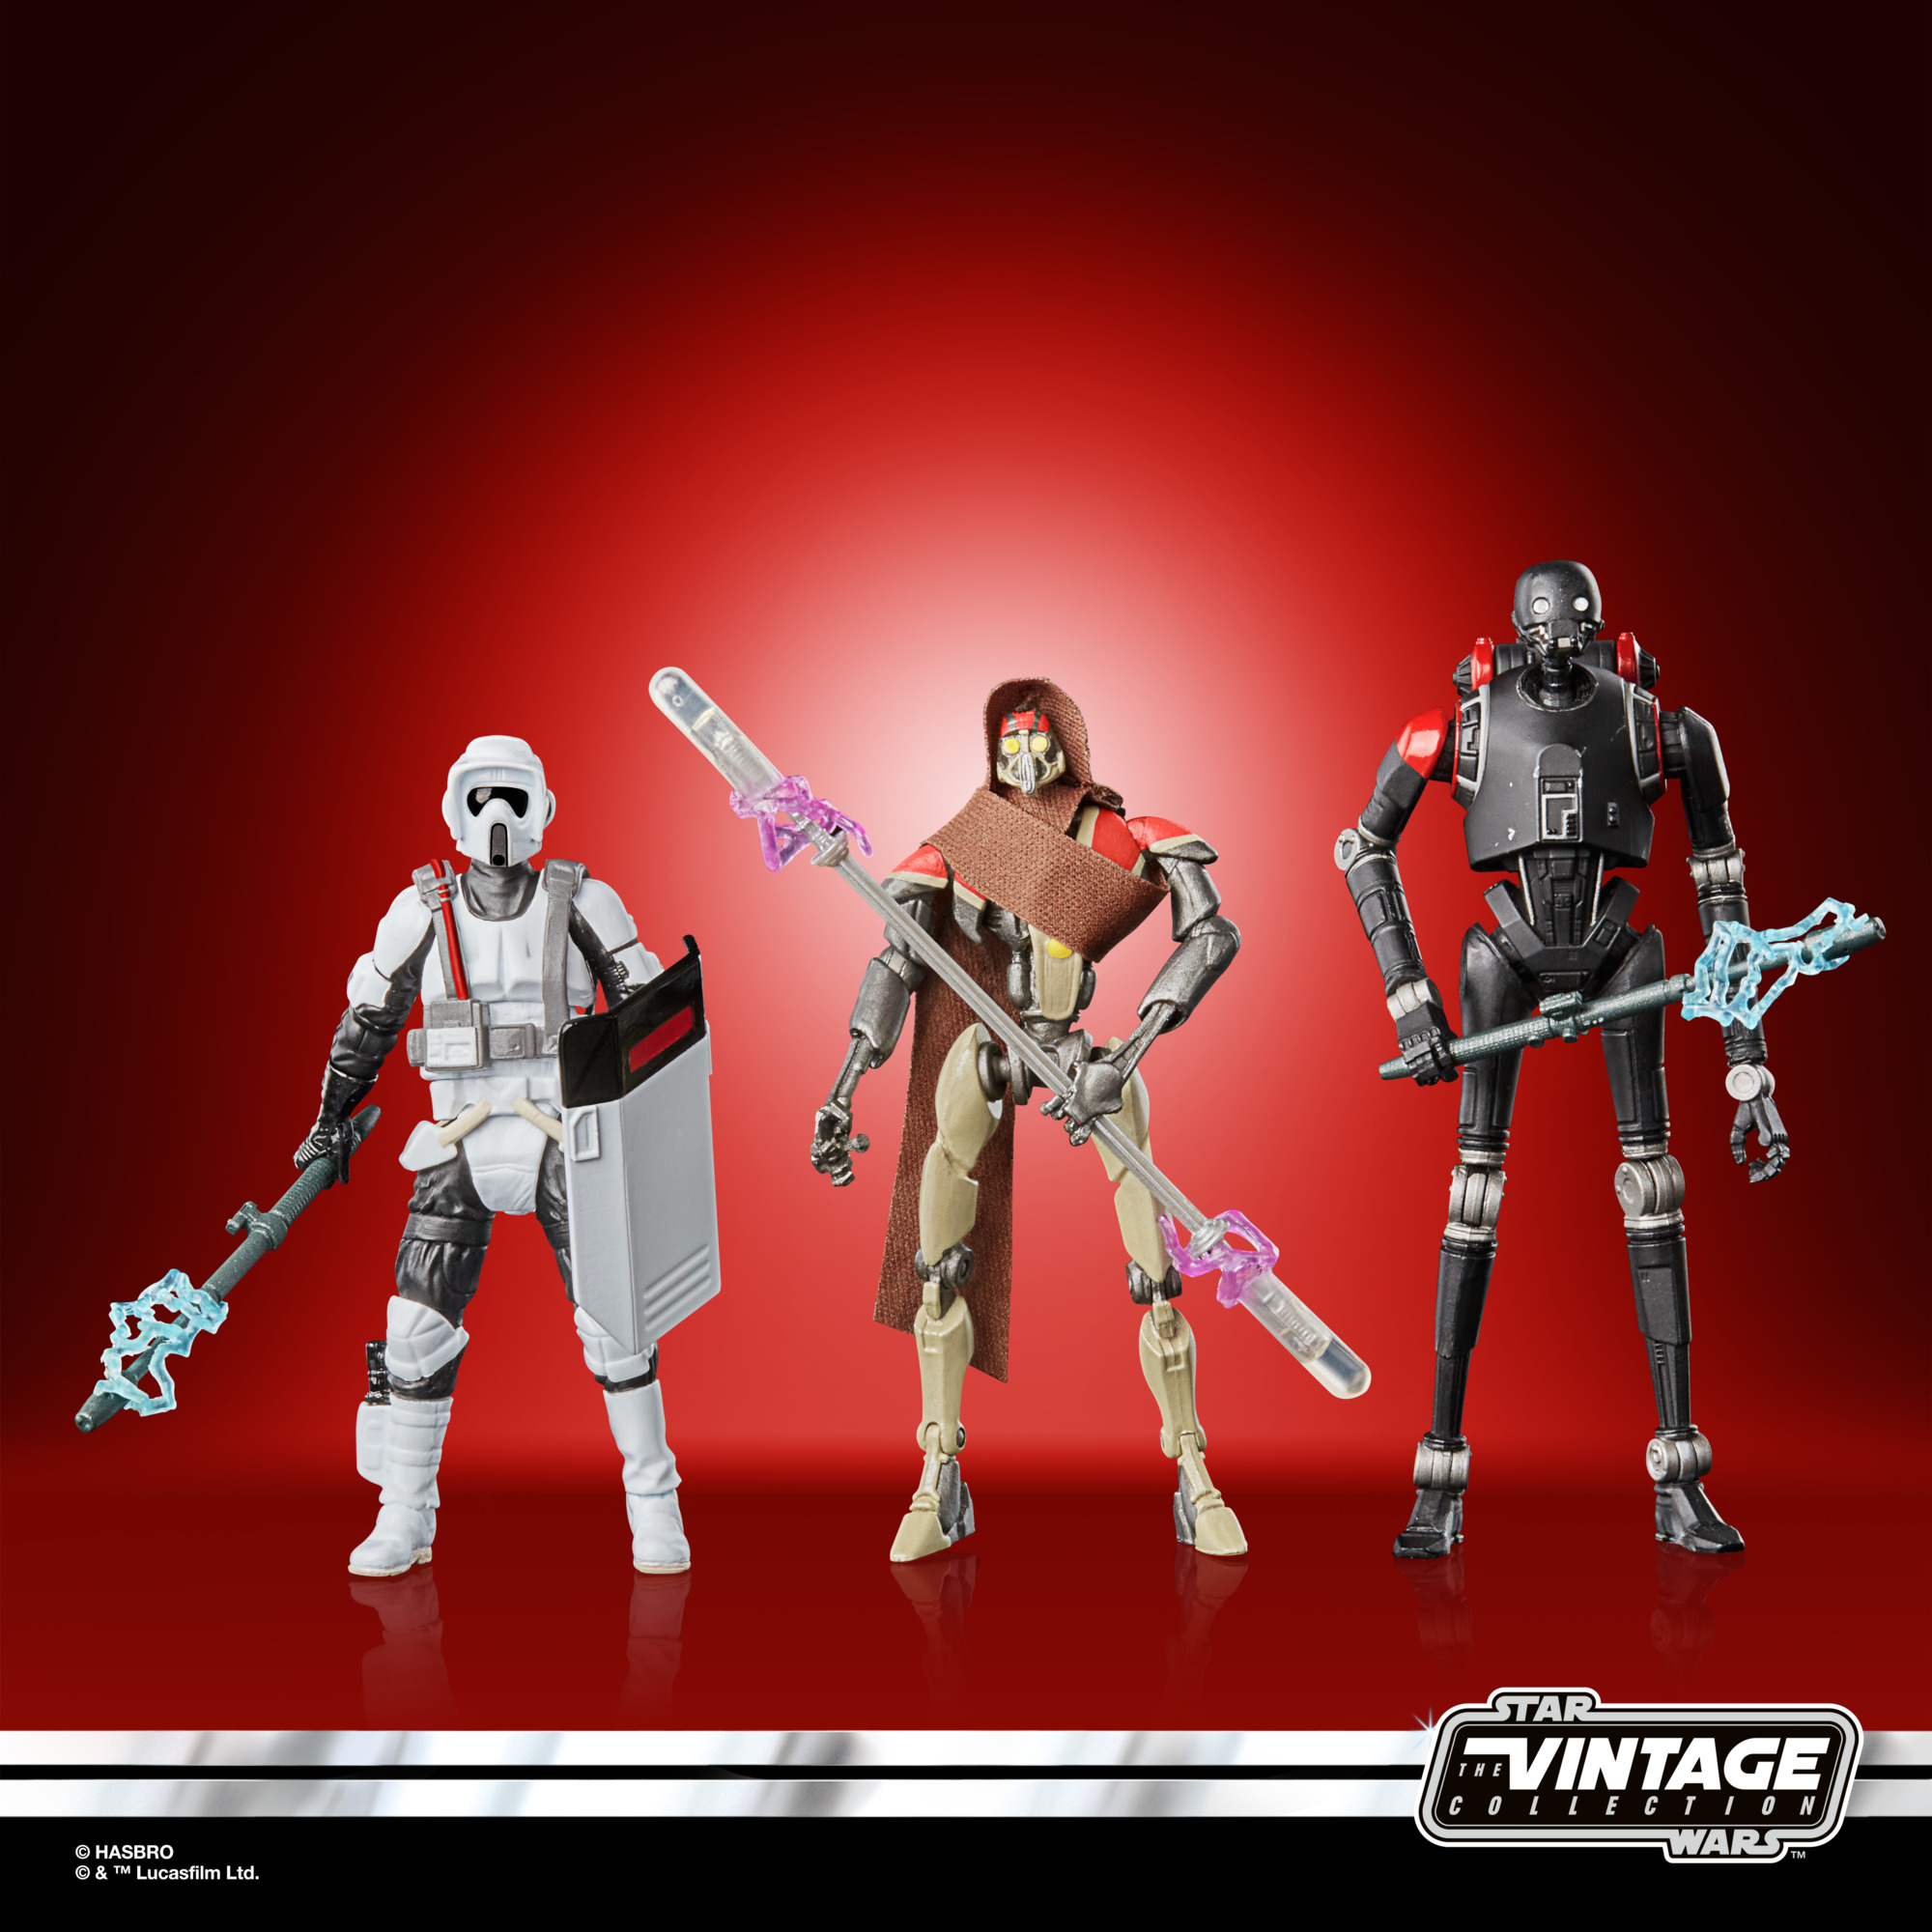 Slideshow of image showing the figure from different angles. Text on screen reads Star Wars the Vintage Collection